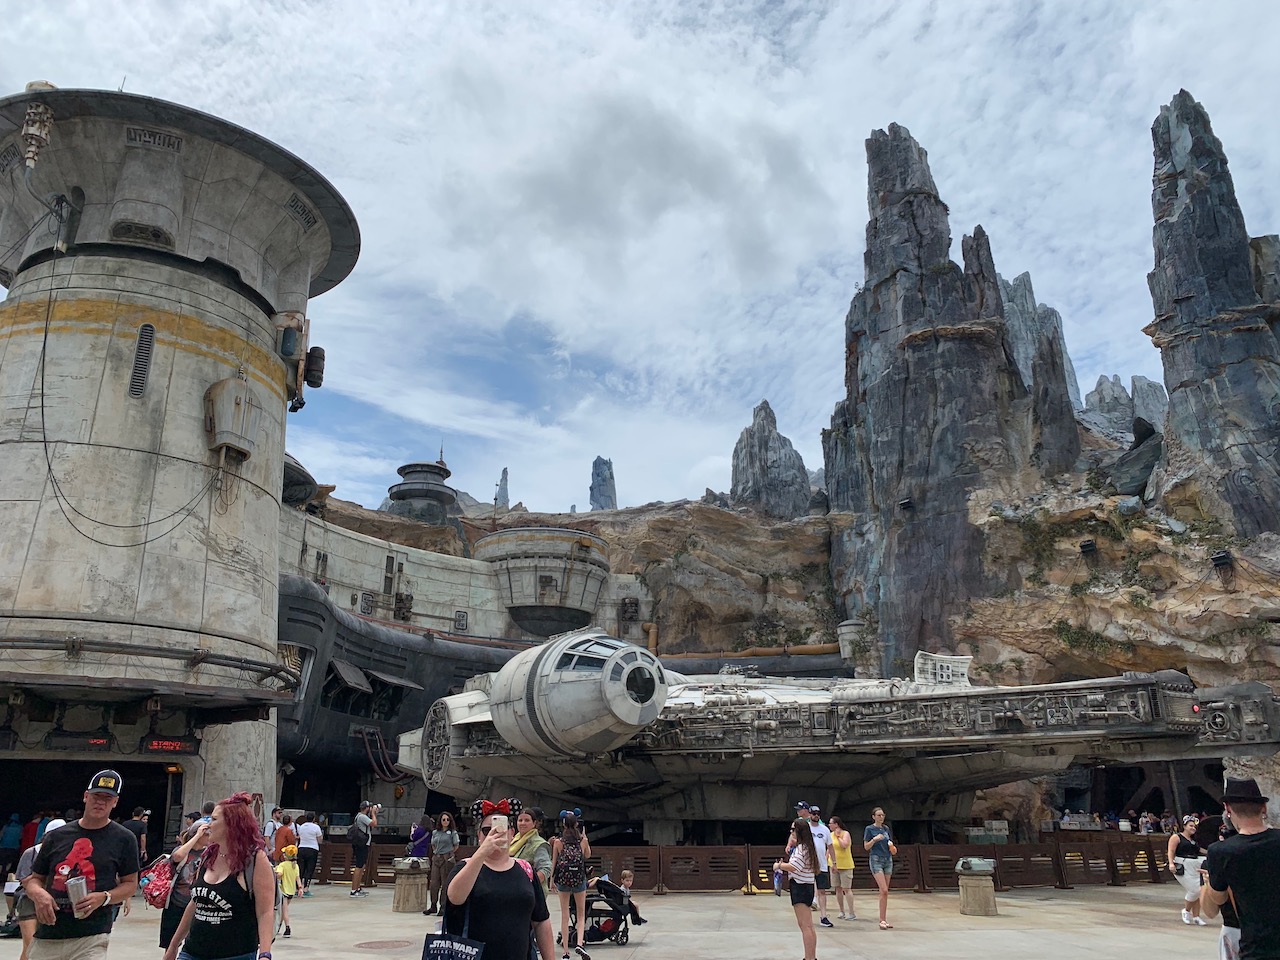 https://www.mousehacking.com/blog/disney-world-galaxys-edge-opening-trip-report-part-1